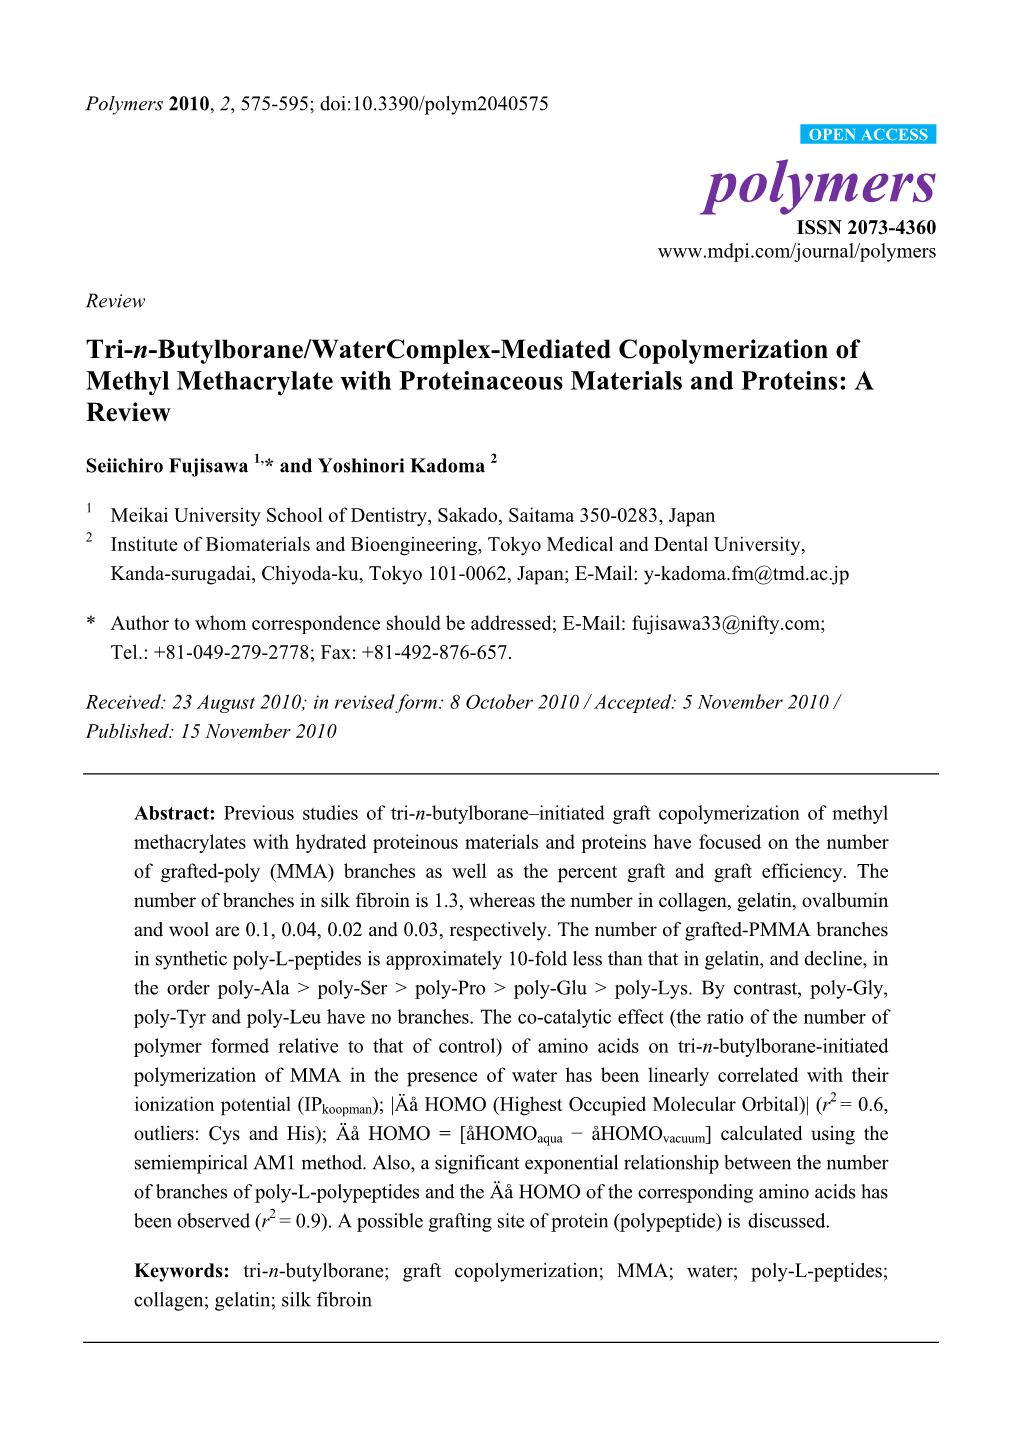 Tri-N-Butylborane/Watercomplex-Mediated Copolymerization of Methyl Methacrylate with Proteinaceous Materials and Proteins: a Review